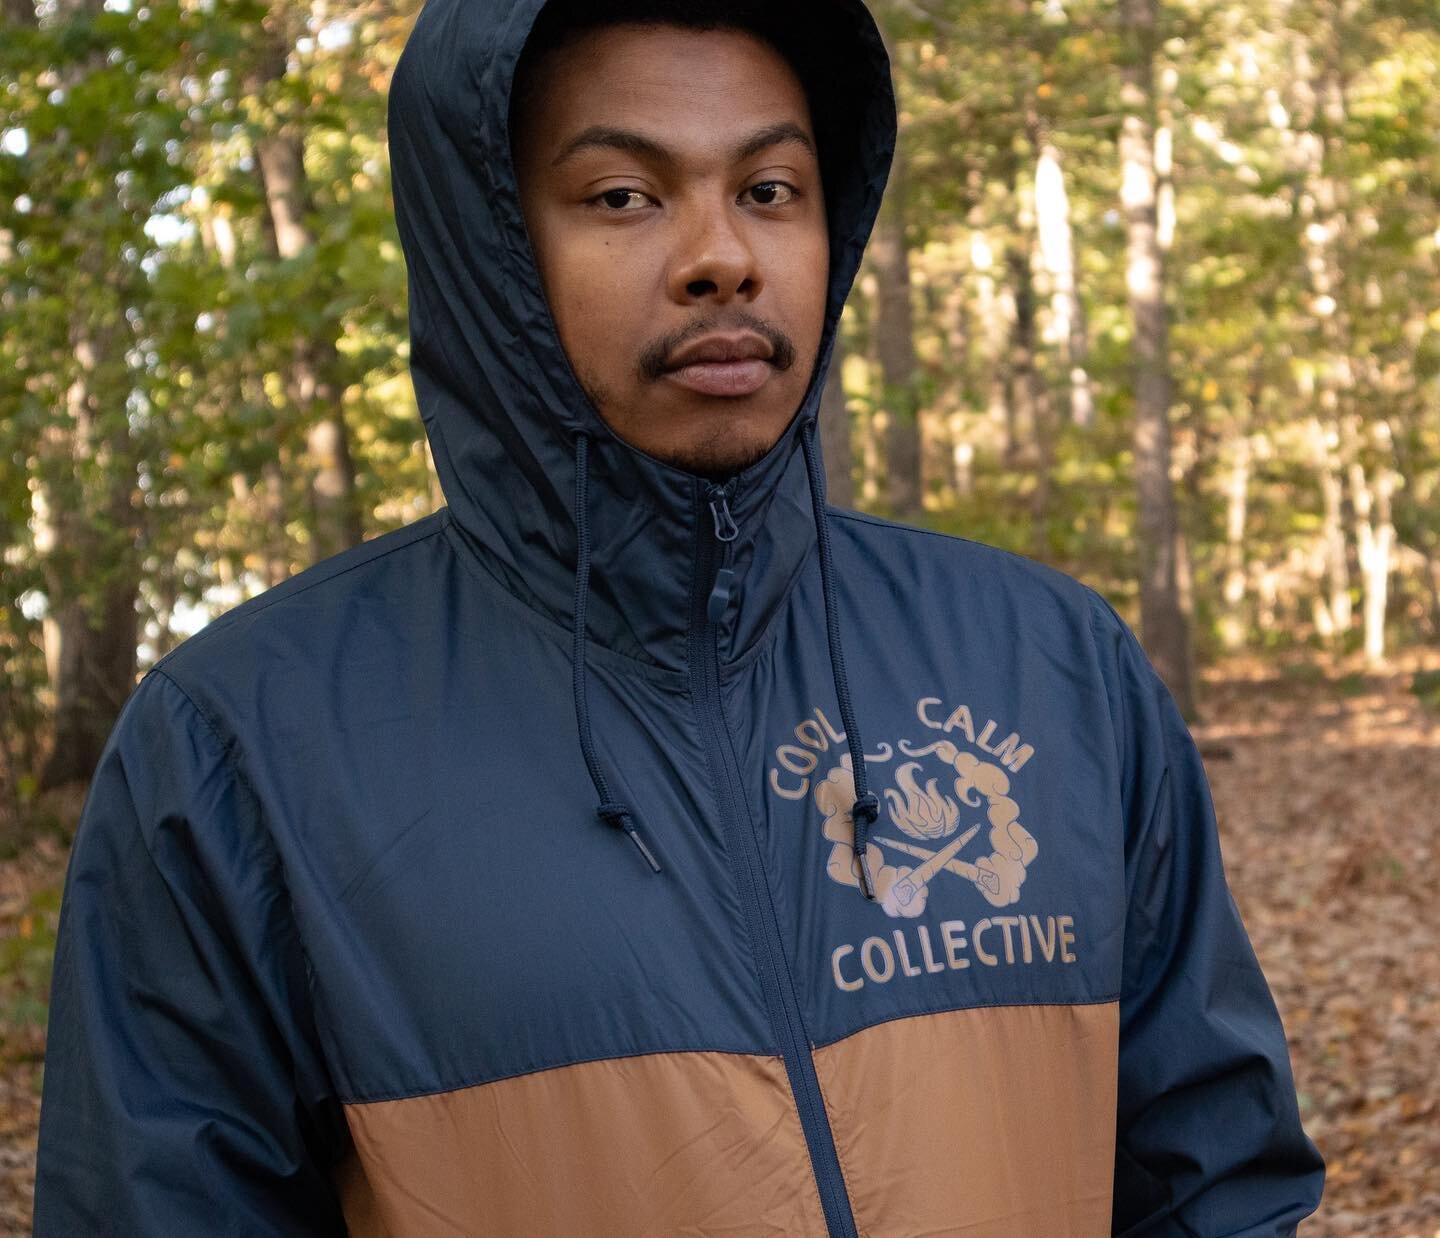 It&rsquo;s spring time! Got some extra coin? Need a light jacket? Grab the Camp Fire Windbreaker 📦🔌Free shipping on domestic orders $40+

#spring #jacket #windbreaker #ccc #virginia #twotone #streetwear #shoplocal #shopsmall #promo #instagood #tues